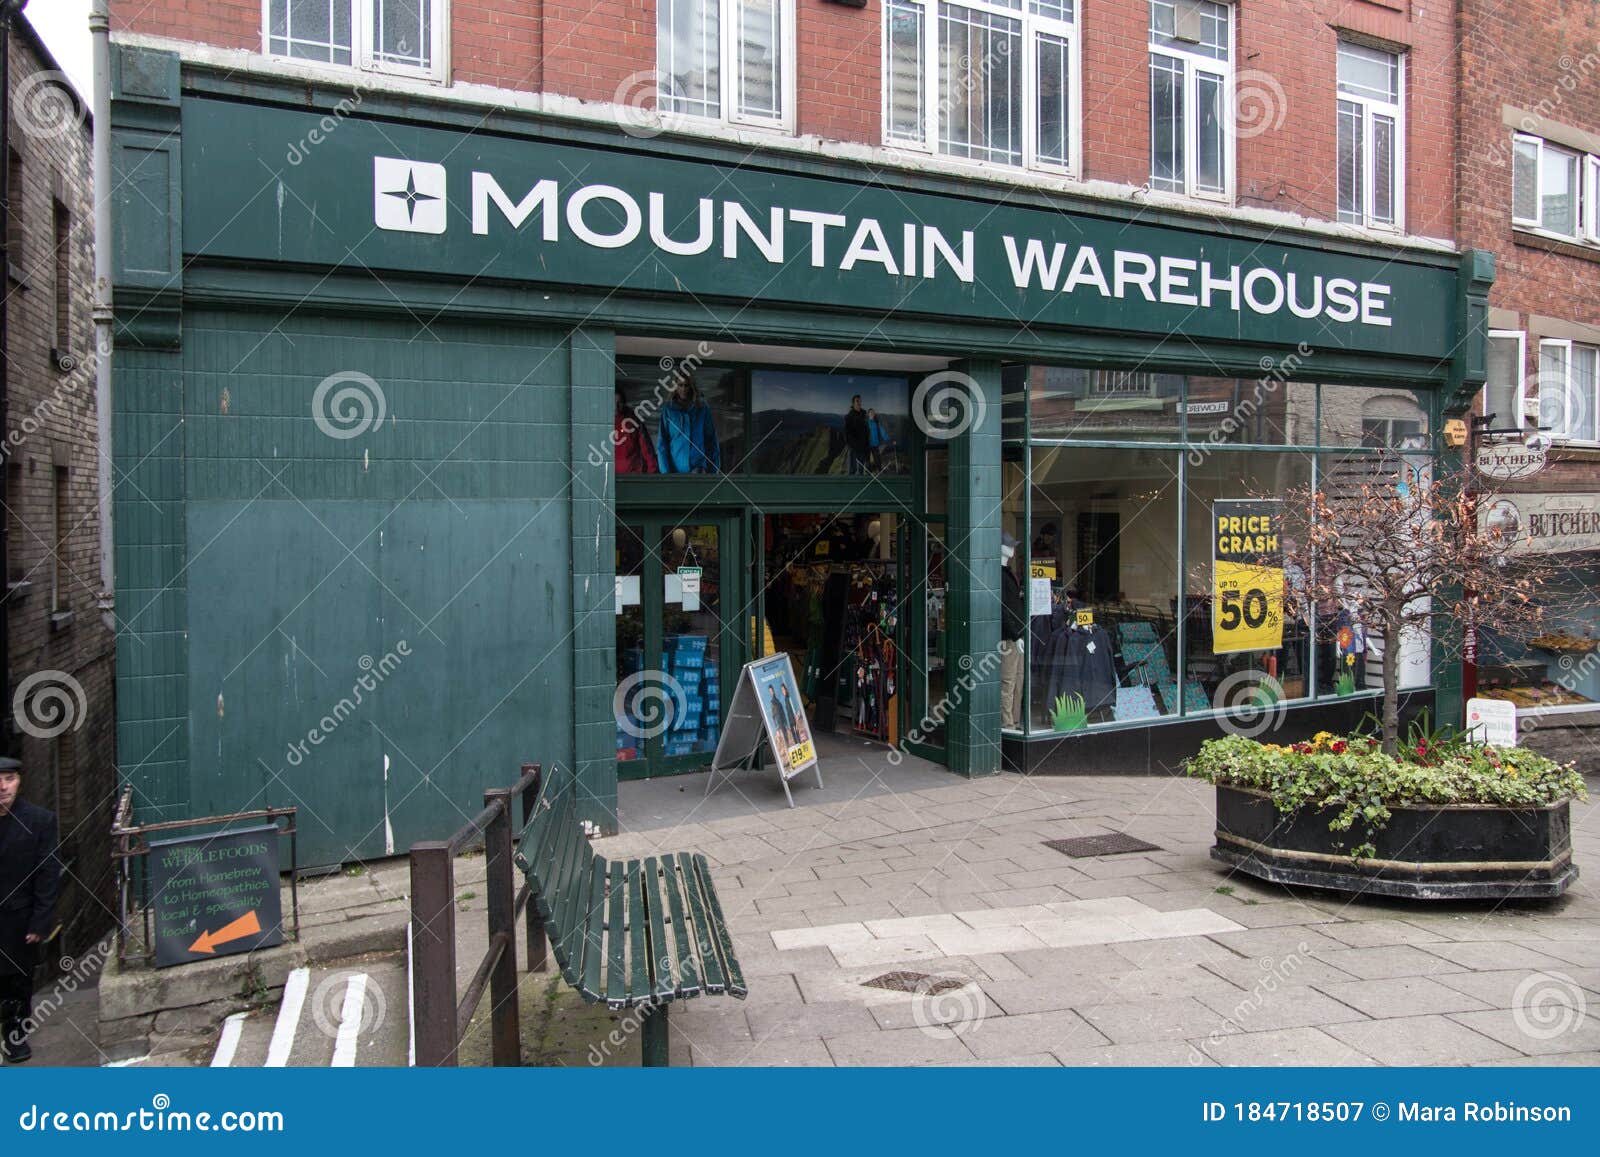 Mountain Warehouse opens in Reigate